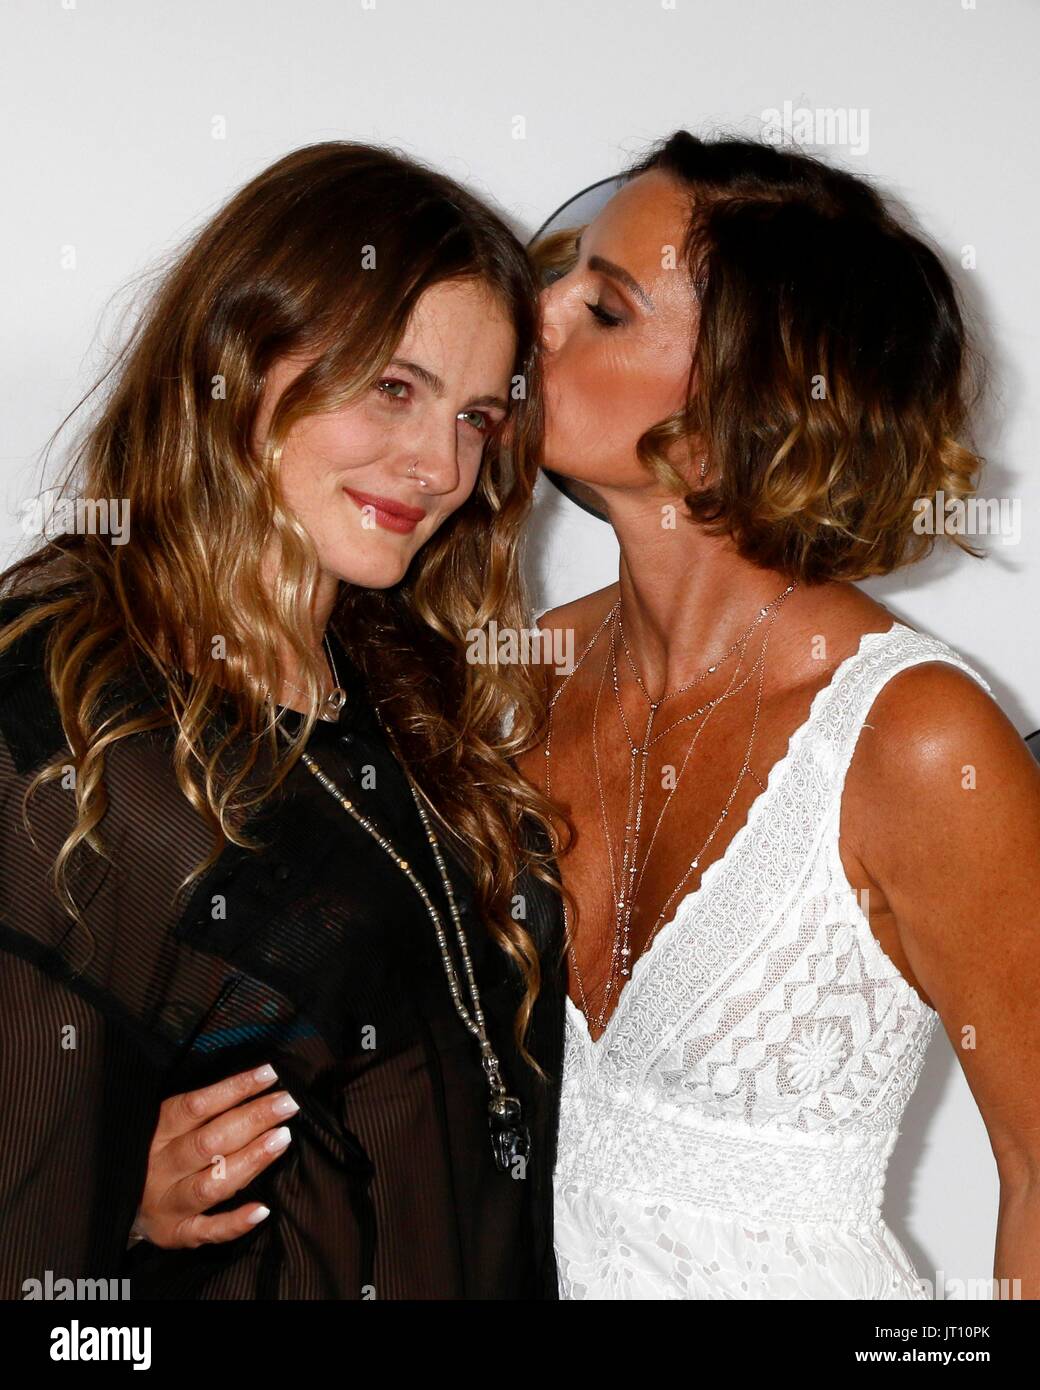 Beverly Hills, CA. 6th Aug, 2017. Willow Anwar, Gabrielle Anwar at arrivals for ABC's TCA Summer Press Tour Party, The Beverly Hilton Hotel, Beverly Hills, CA August 6, 2017. Credit: Priscilla Grant/Everett Collection/Alamy Live News Stock Photo